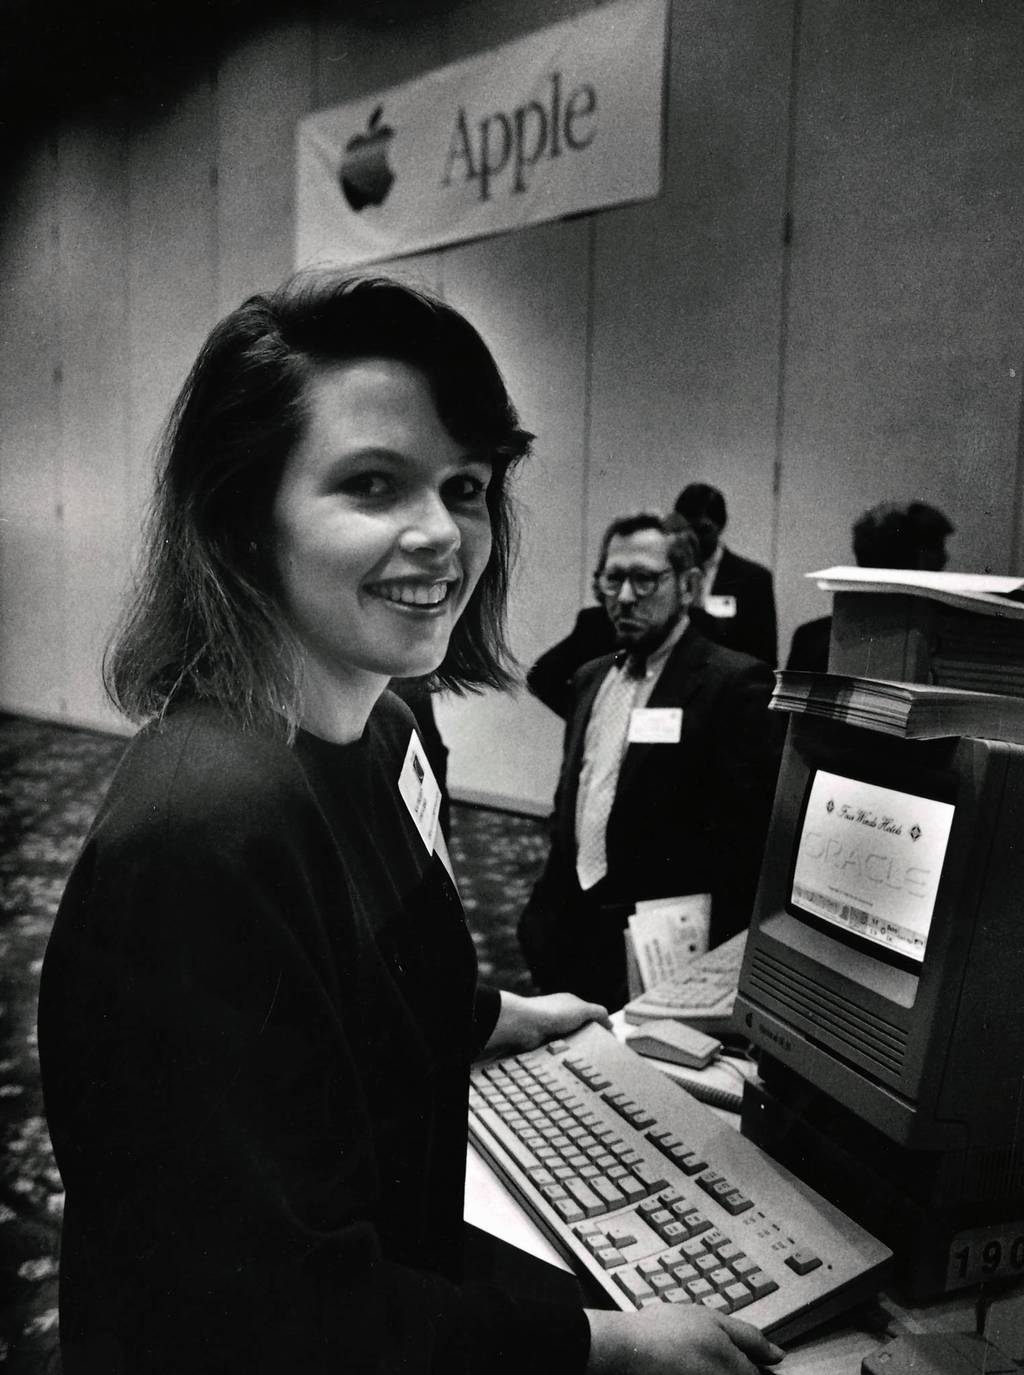 Oracle Corp's Kathleen O'Rourke demonstrates the company's databases software for Macintosh computers Wednesday at an Apple computer conference on computer networks at the Marriott Hotel.